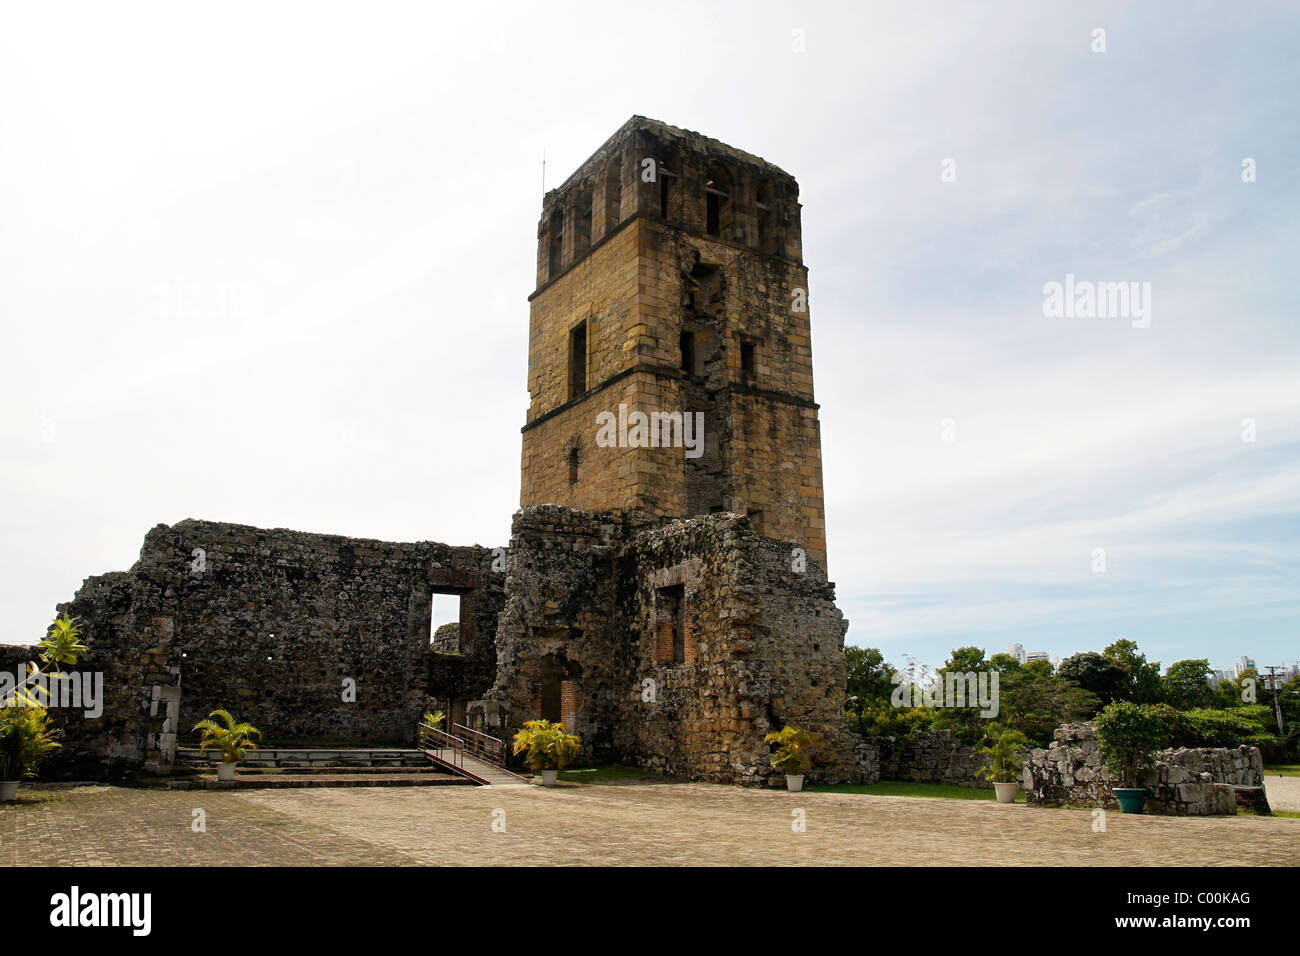 Cathedral Tower. Old Panama, Panama City, Republic of Panama, Central America Stock Photo